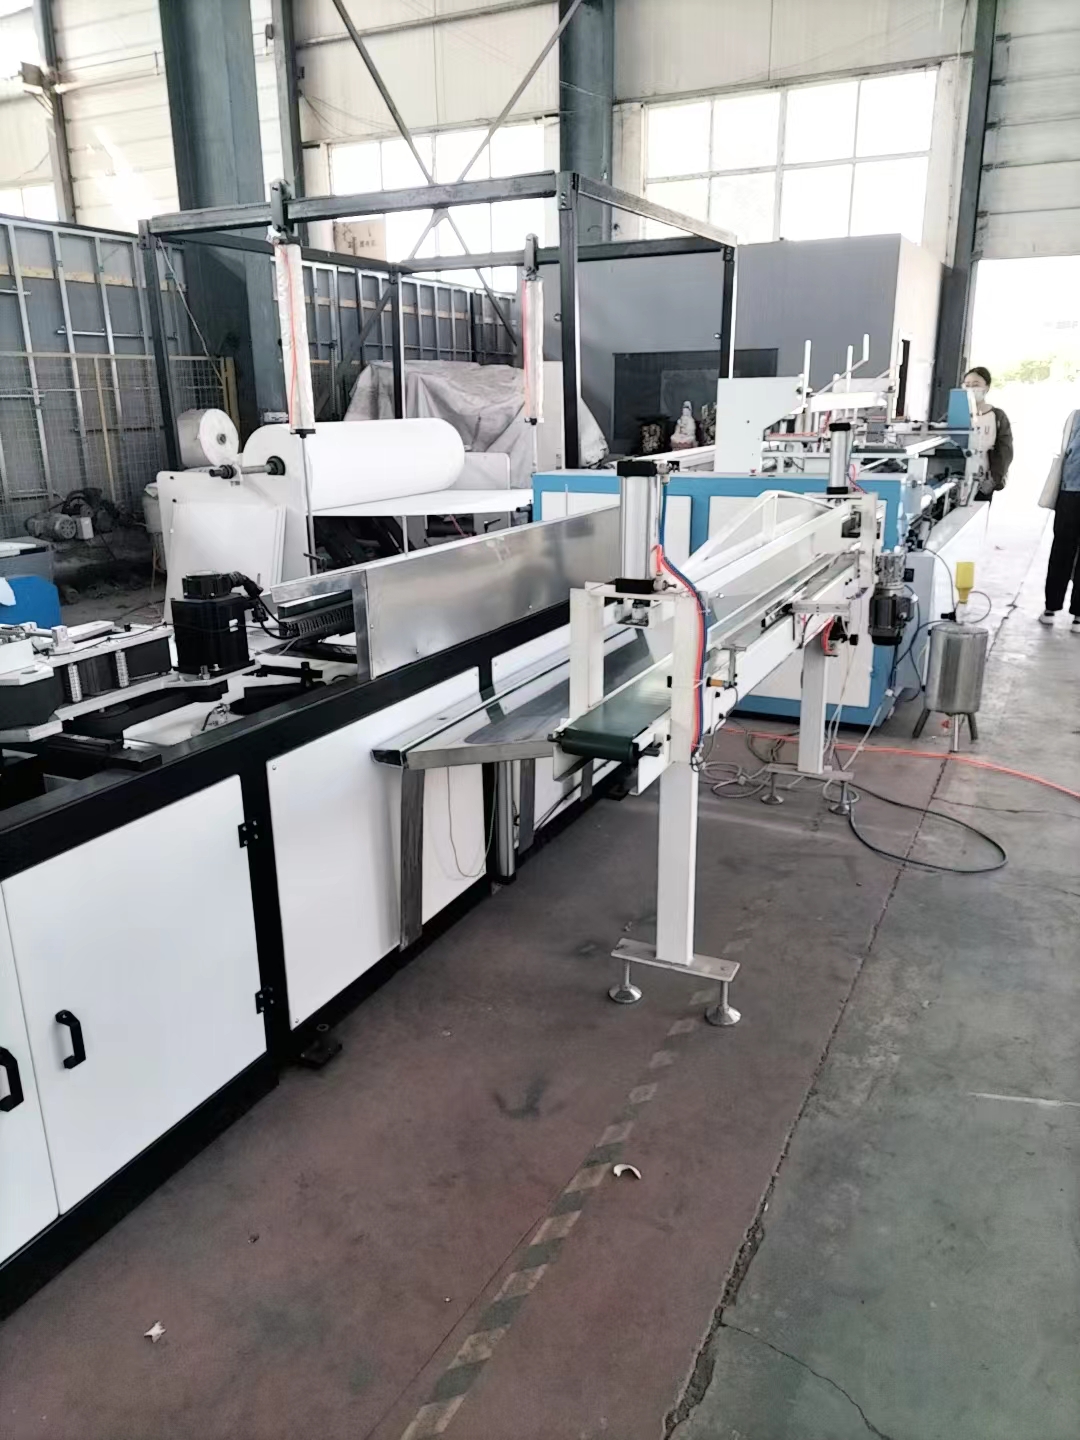 Guangmao Rewinding Machine 1880 Small Fully Automatic Paper Rolling Production Equipment Napkin Paper Extraction, Cutting, and Packaging